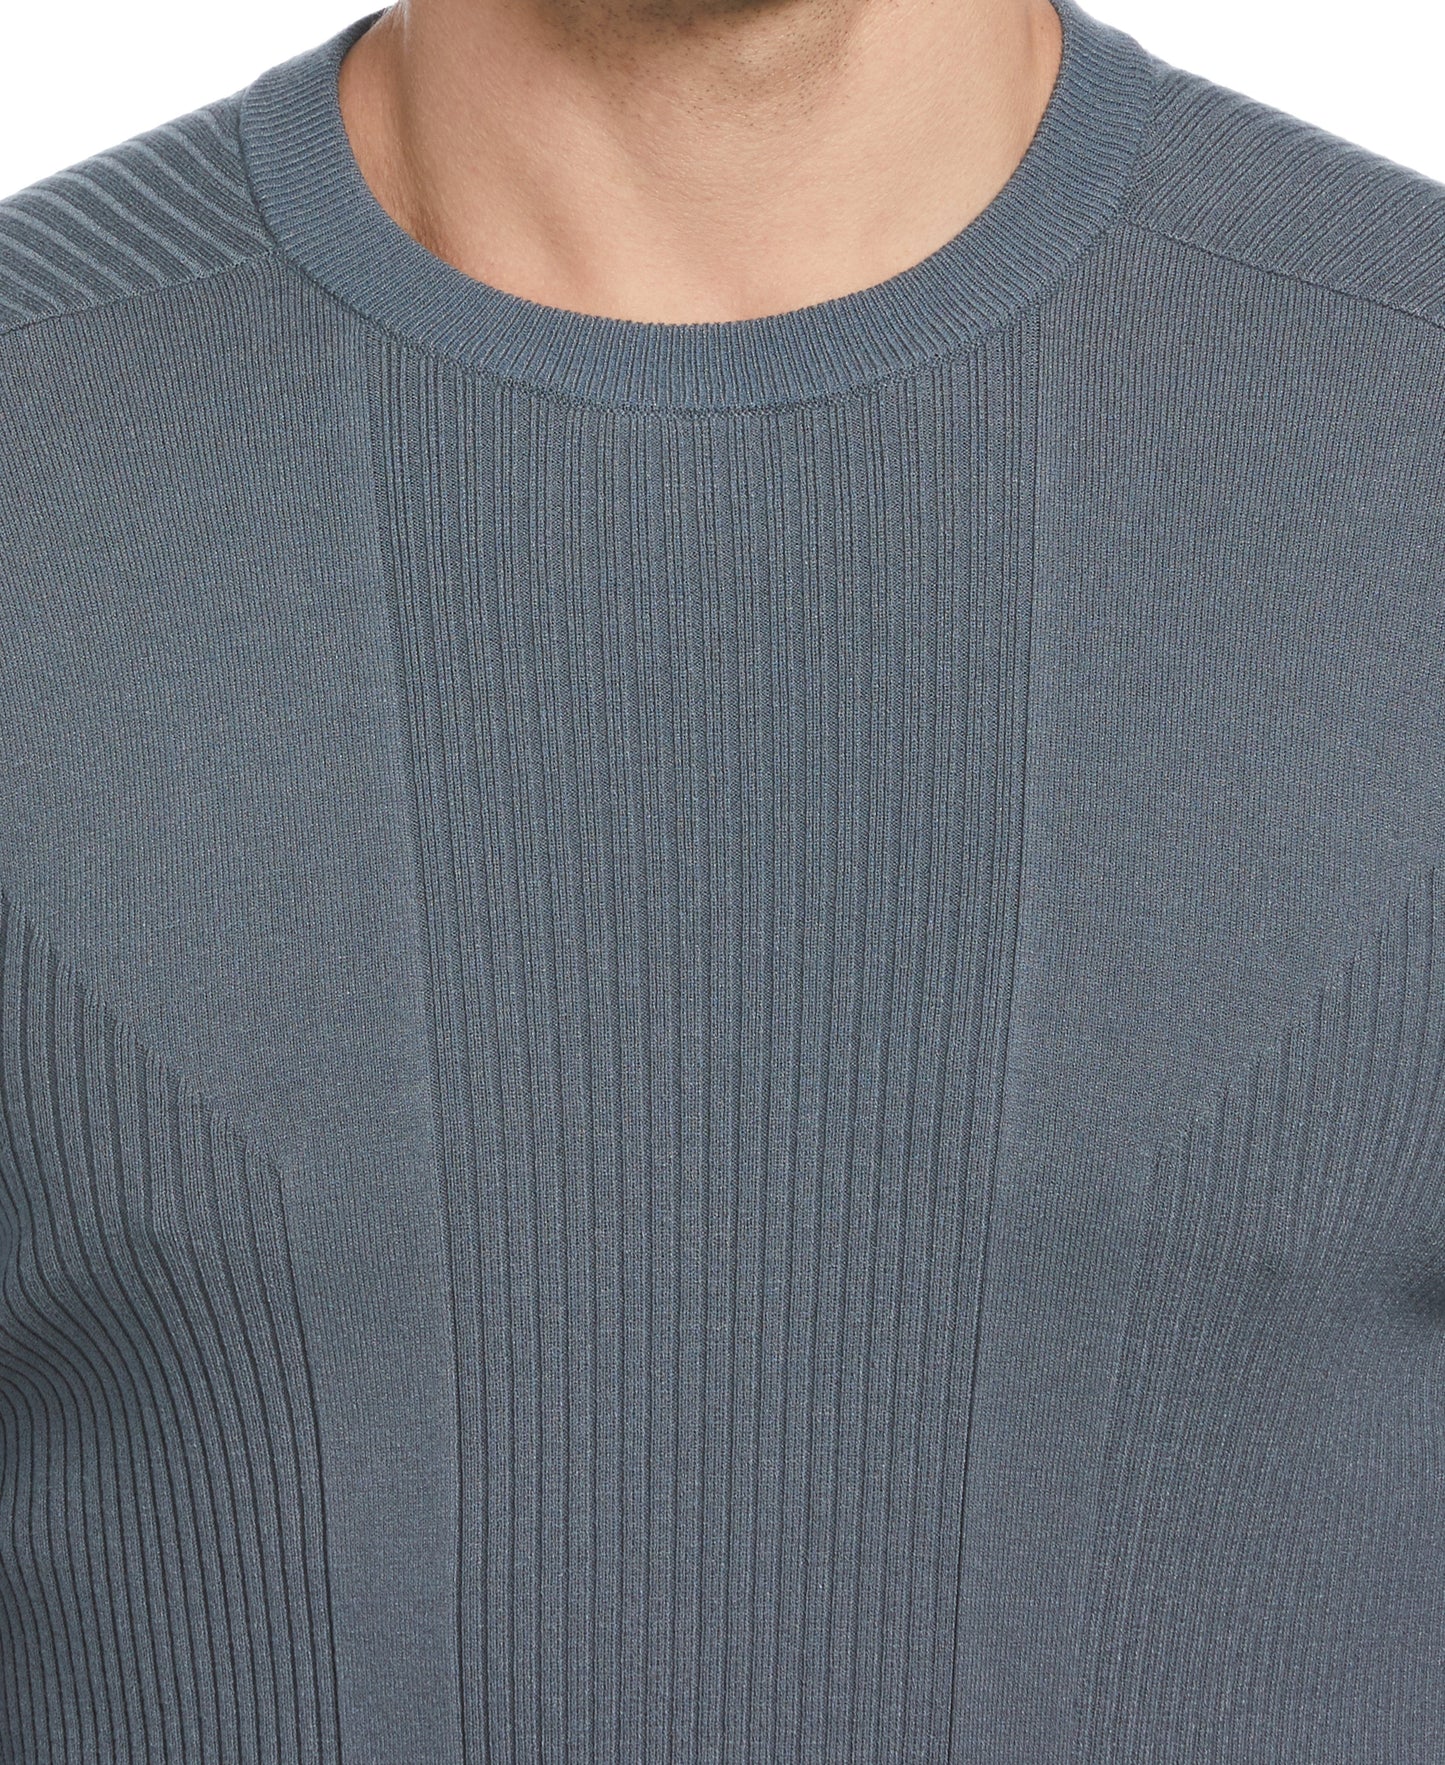 Tech Ribbed Crew Neck Sweater